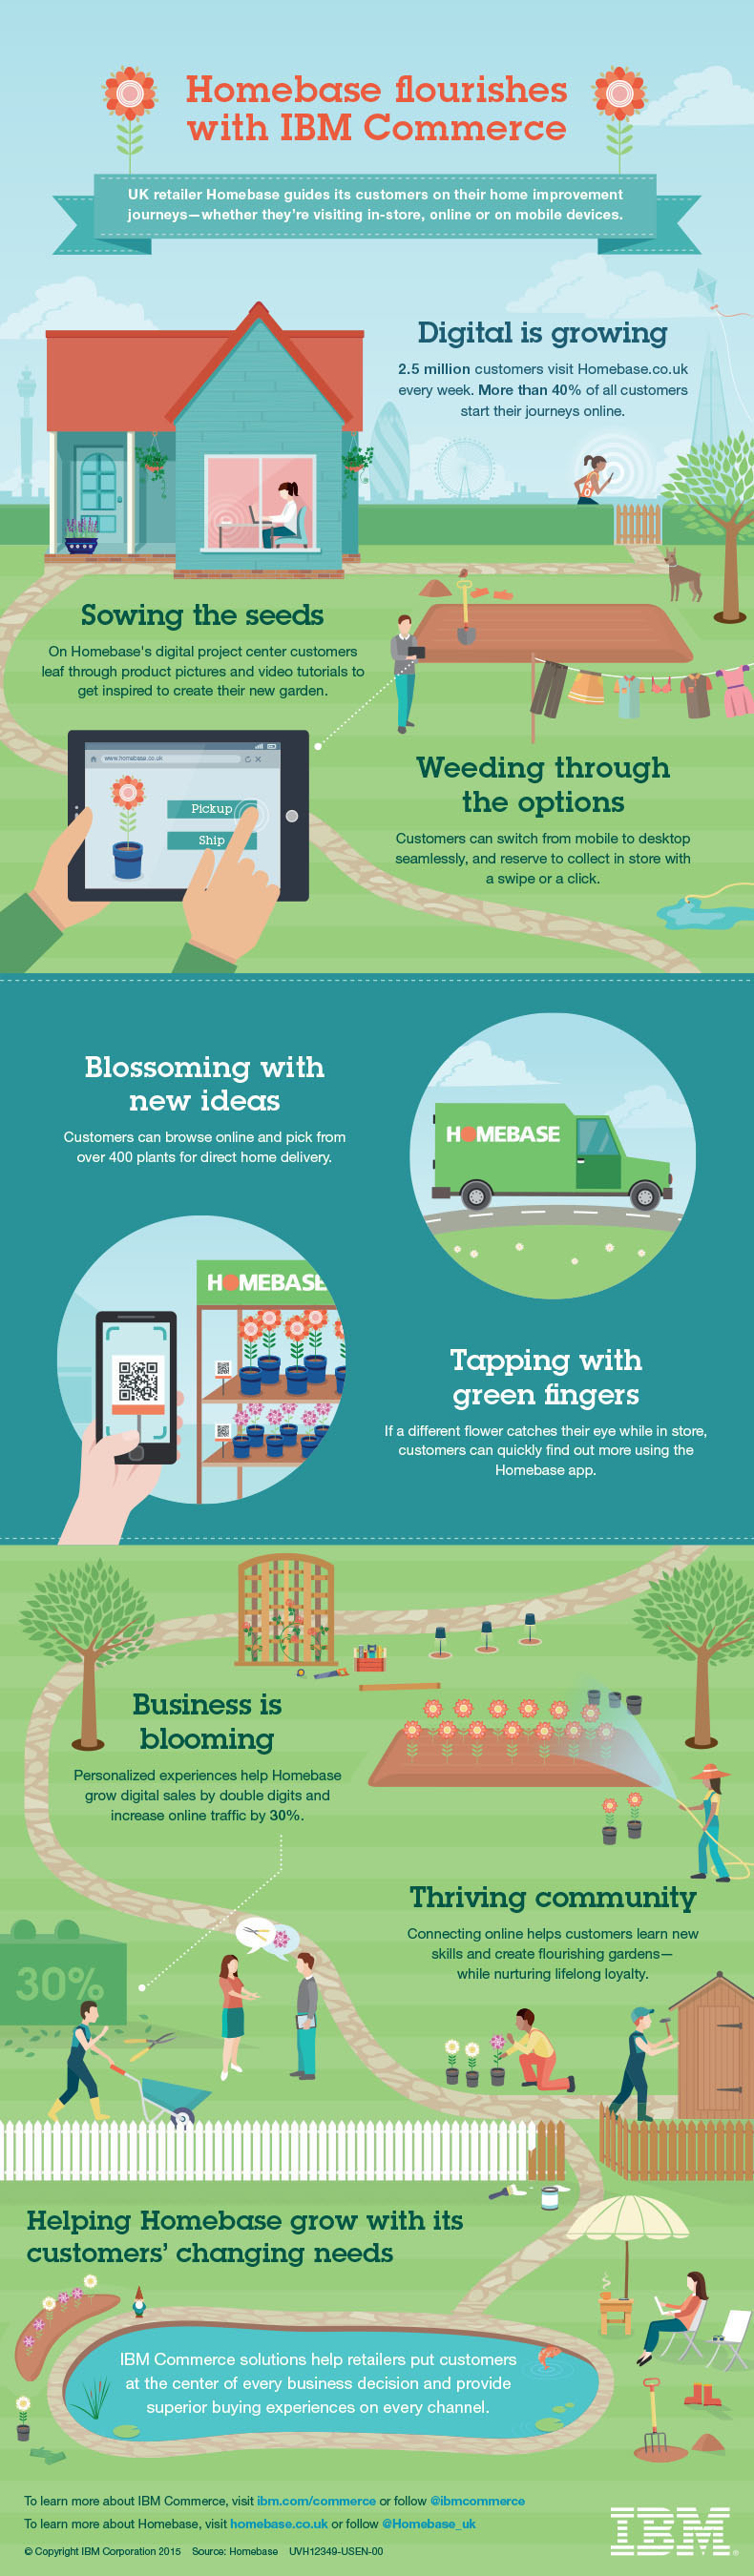 This infographic shows how UK home and garden retailer Homebase guides its customers on their home improvement journeys by using IBM Commerce solutions to help personalize the customer experience.